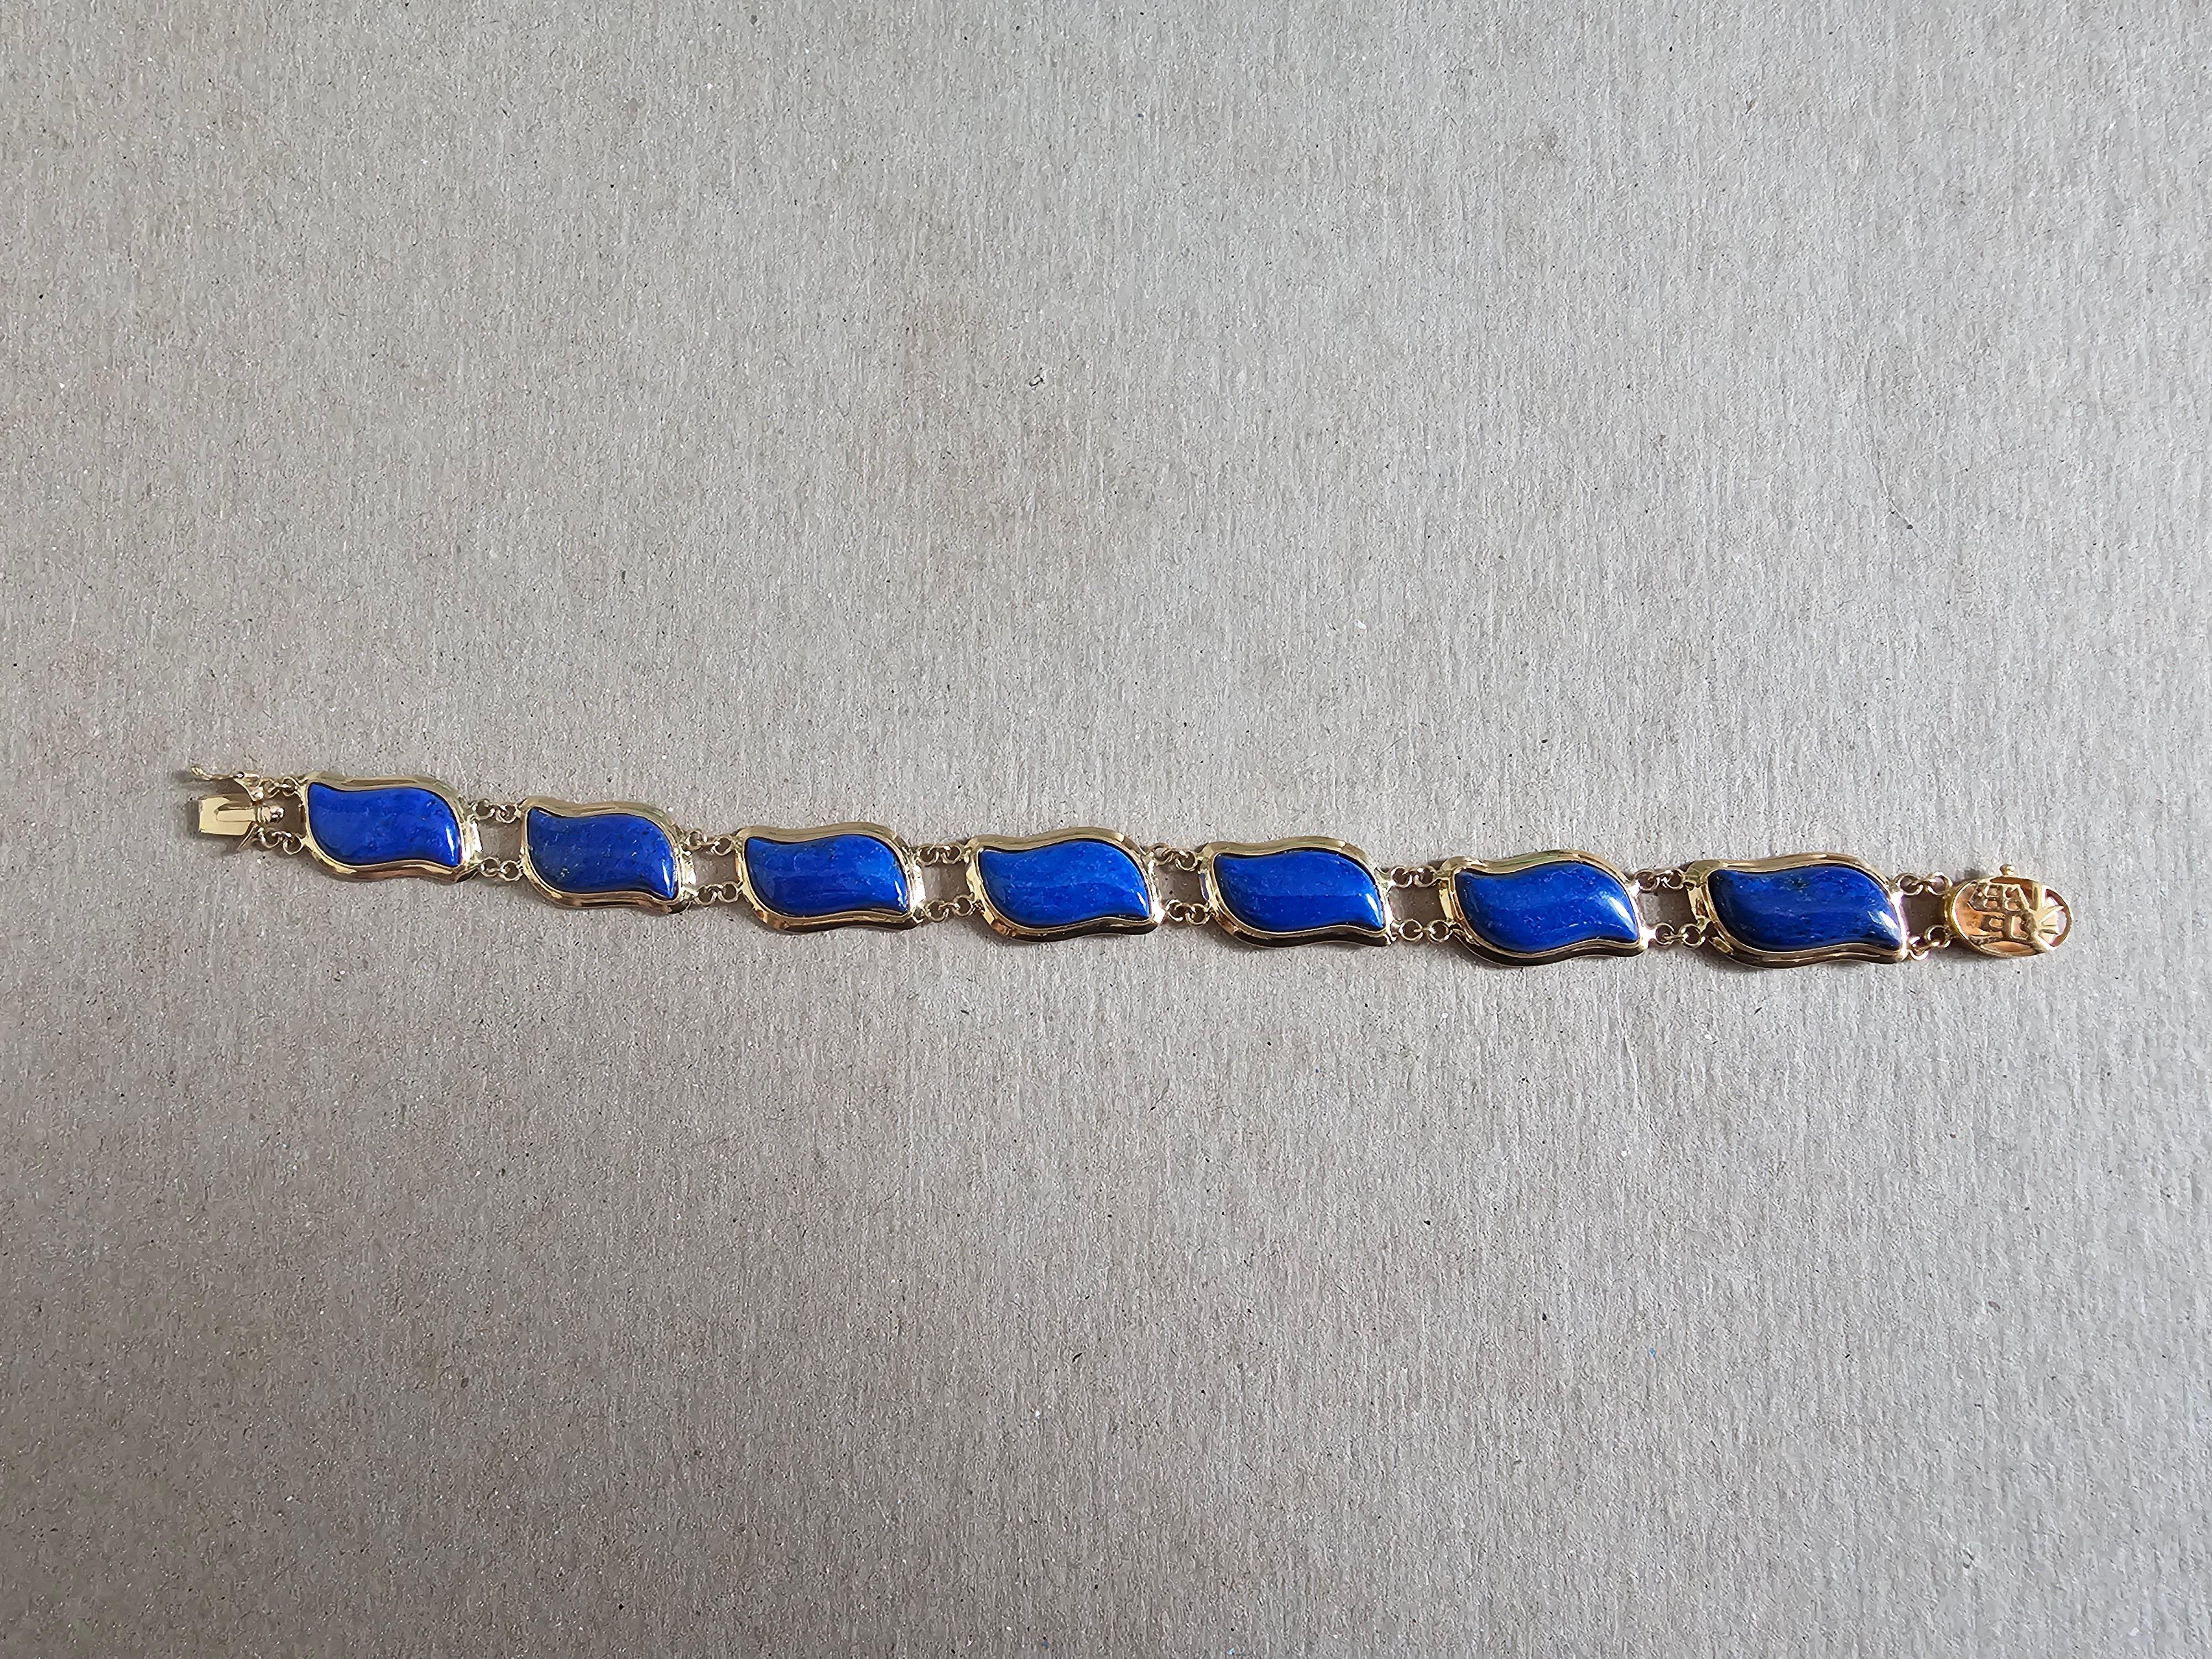 Blue Lapis Lazuli Bracelet Aurora Double Chained with 14K Solid Yellow Gold For Sale 6